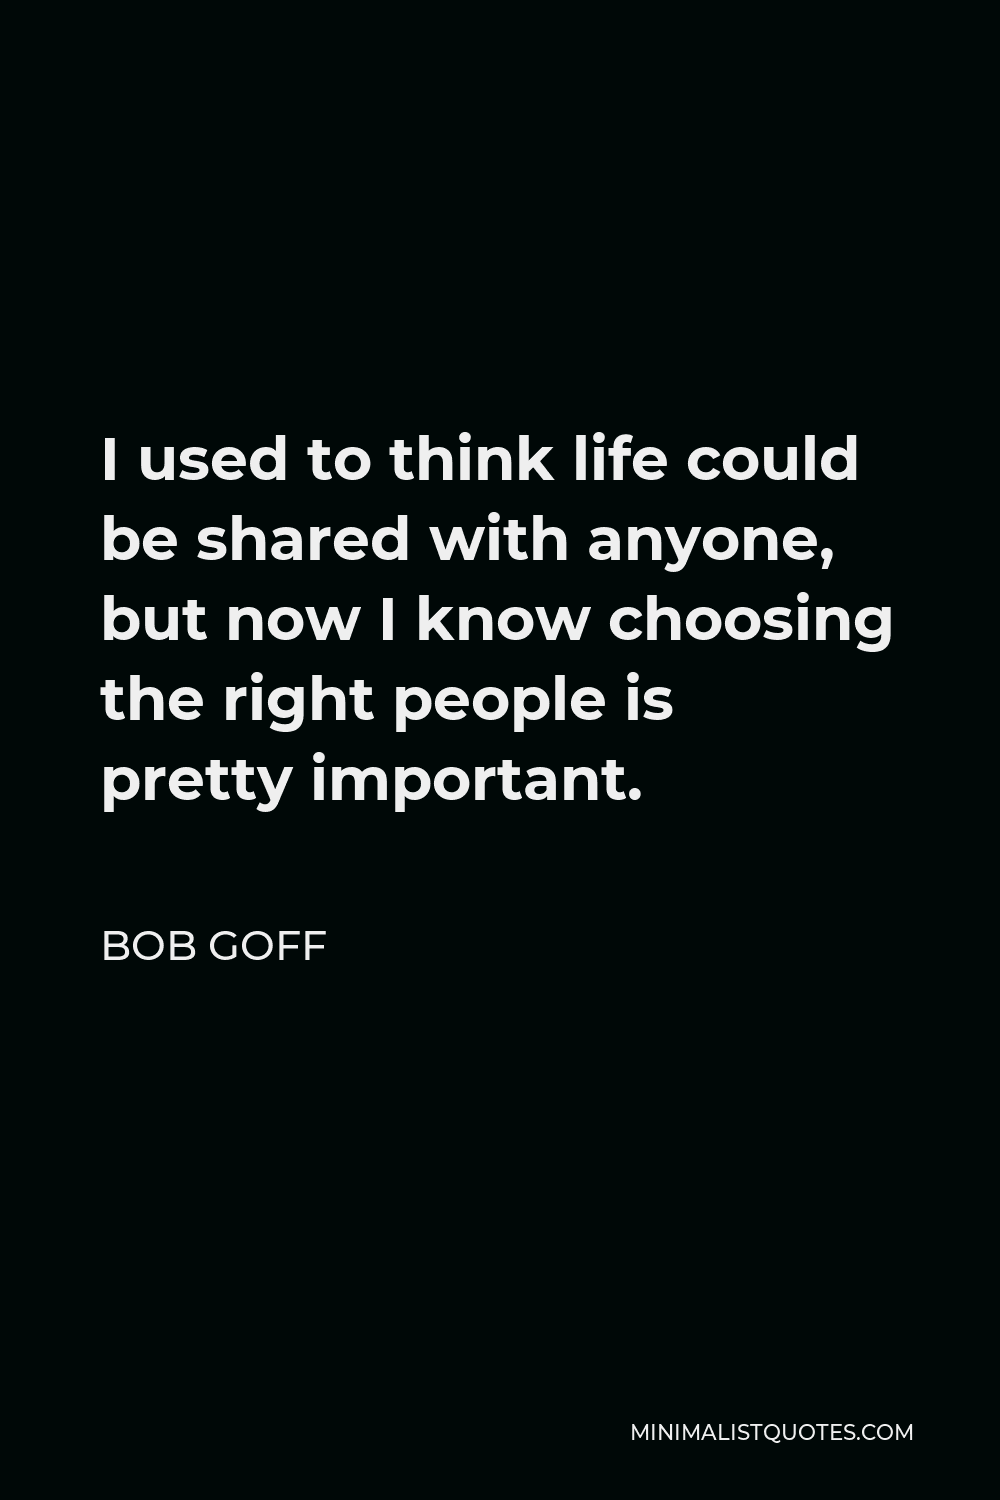 Bob Goff Quote - I used to think life could be shared with anyone, but now I know choosing the right people is pretty important.